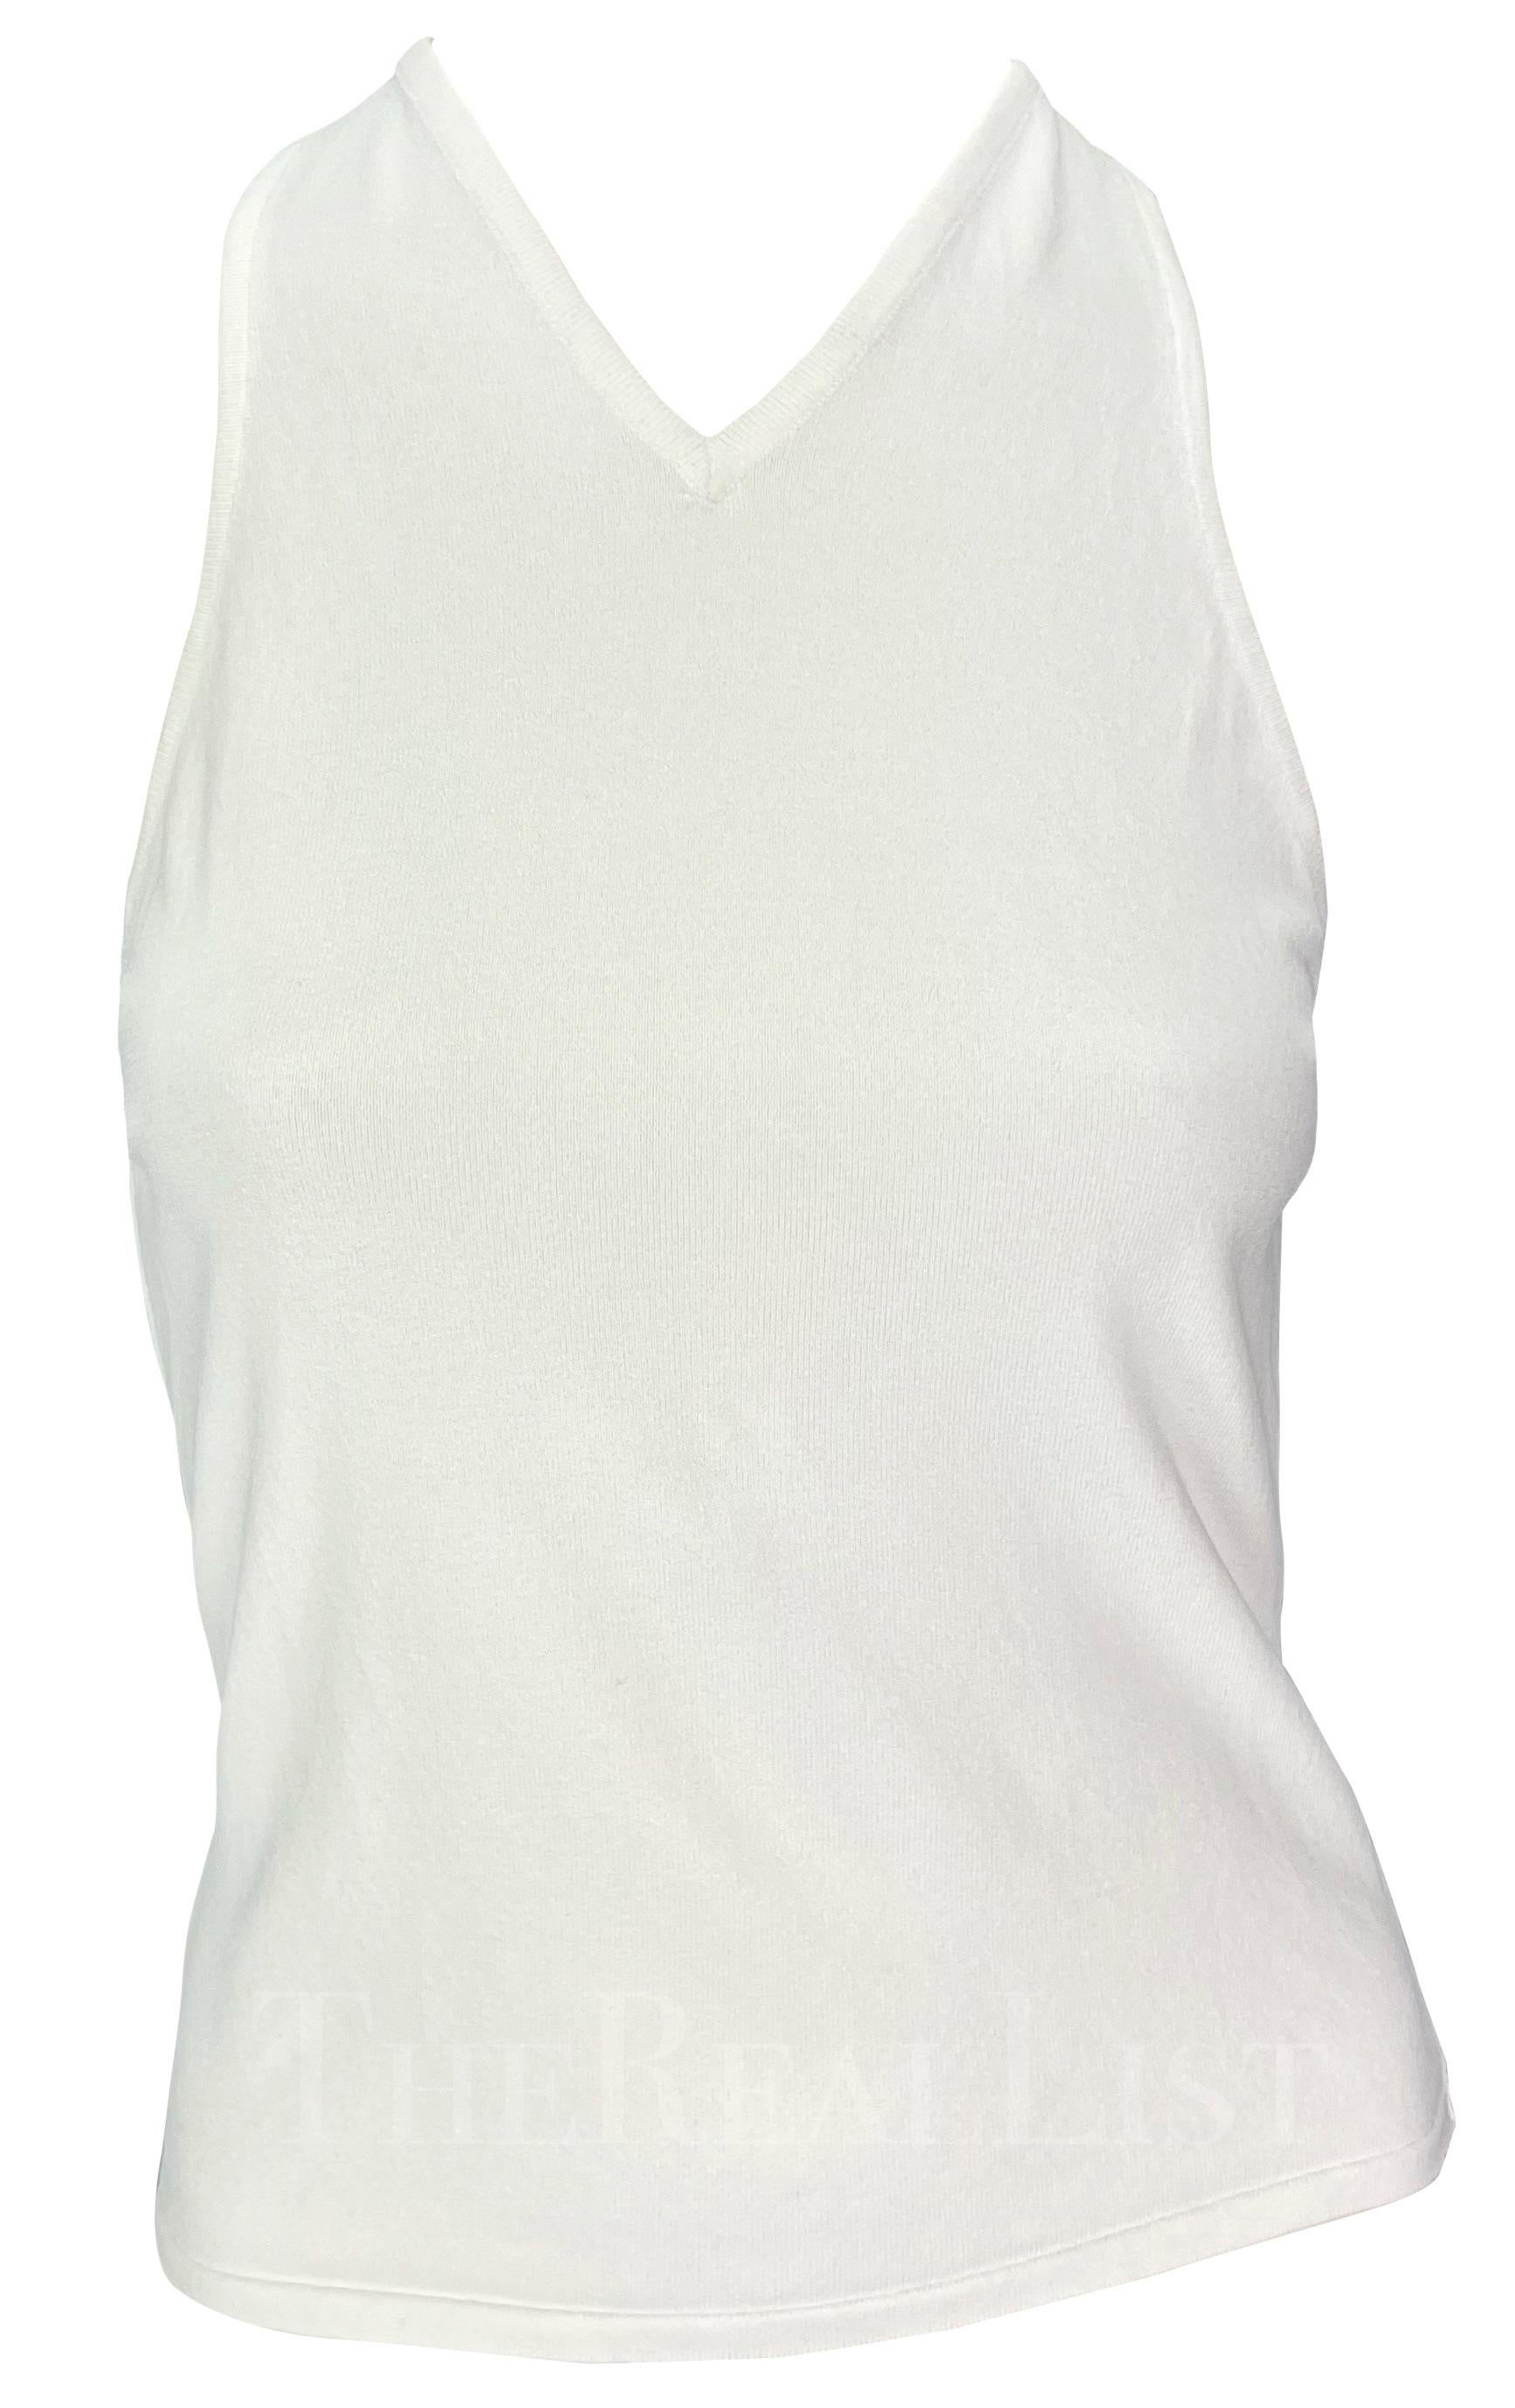 S/S 1998 Gucci by Tom Ford White Stretch Knit Racerback Tank Top For Sale 1